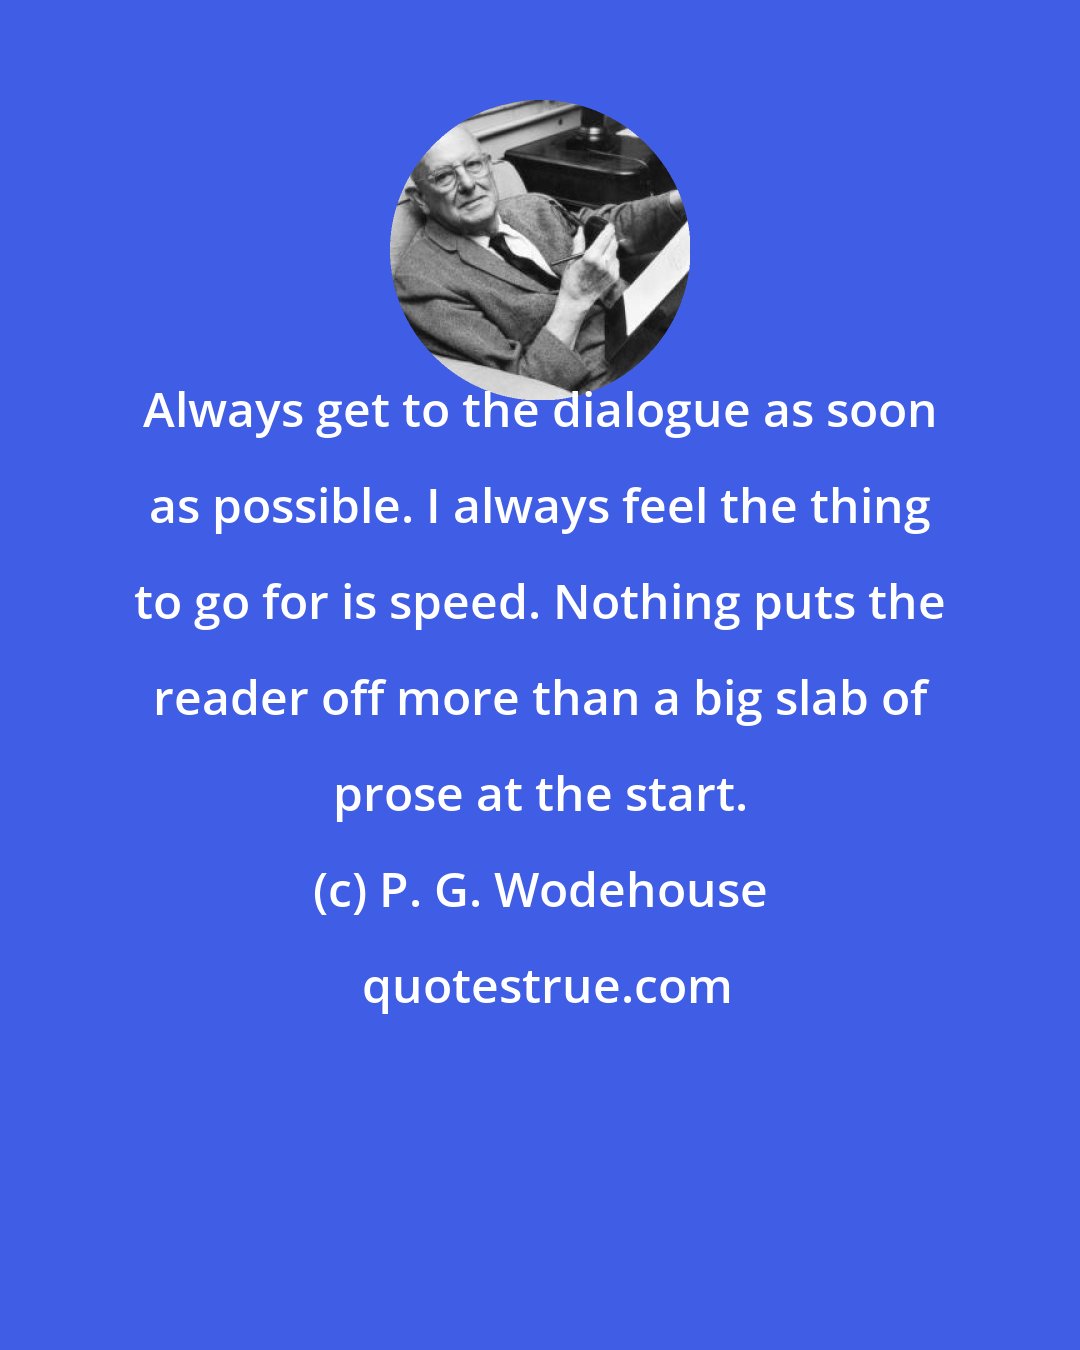 P. G. Wodehouse: Always get to the dialogue as soon as possible. I always feel the thing to go for is speed. Nothing puts the reader off more than a big slab of prose at the start.